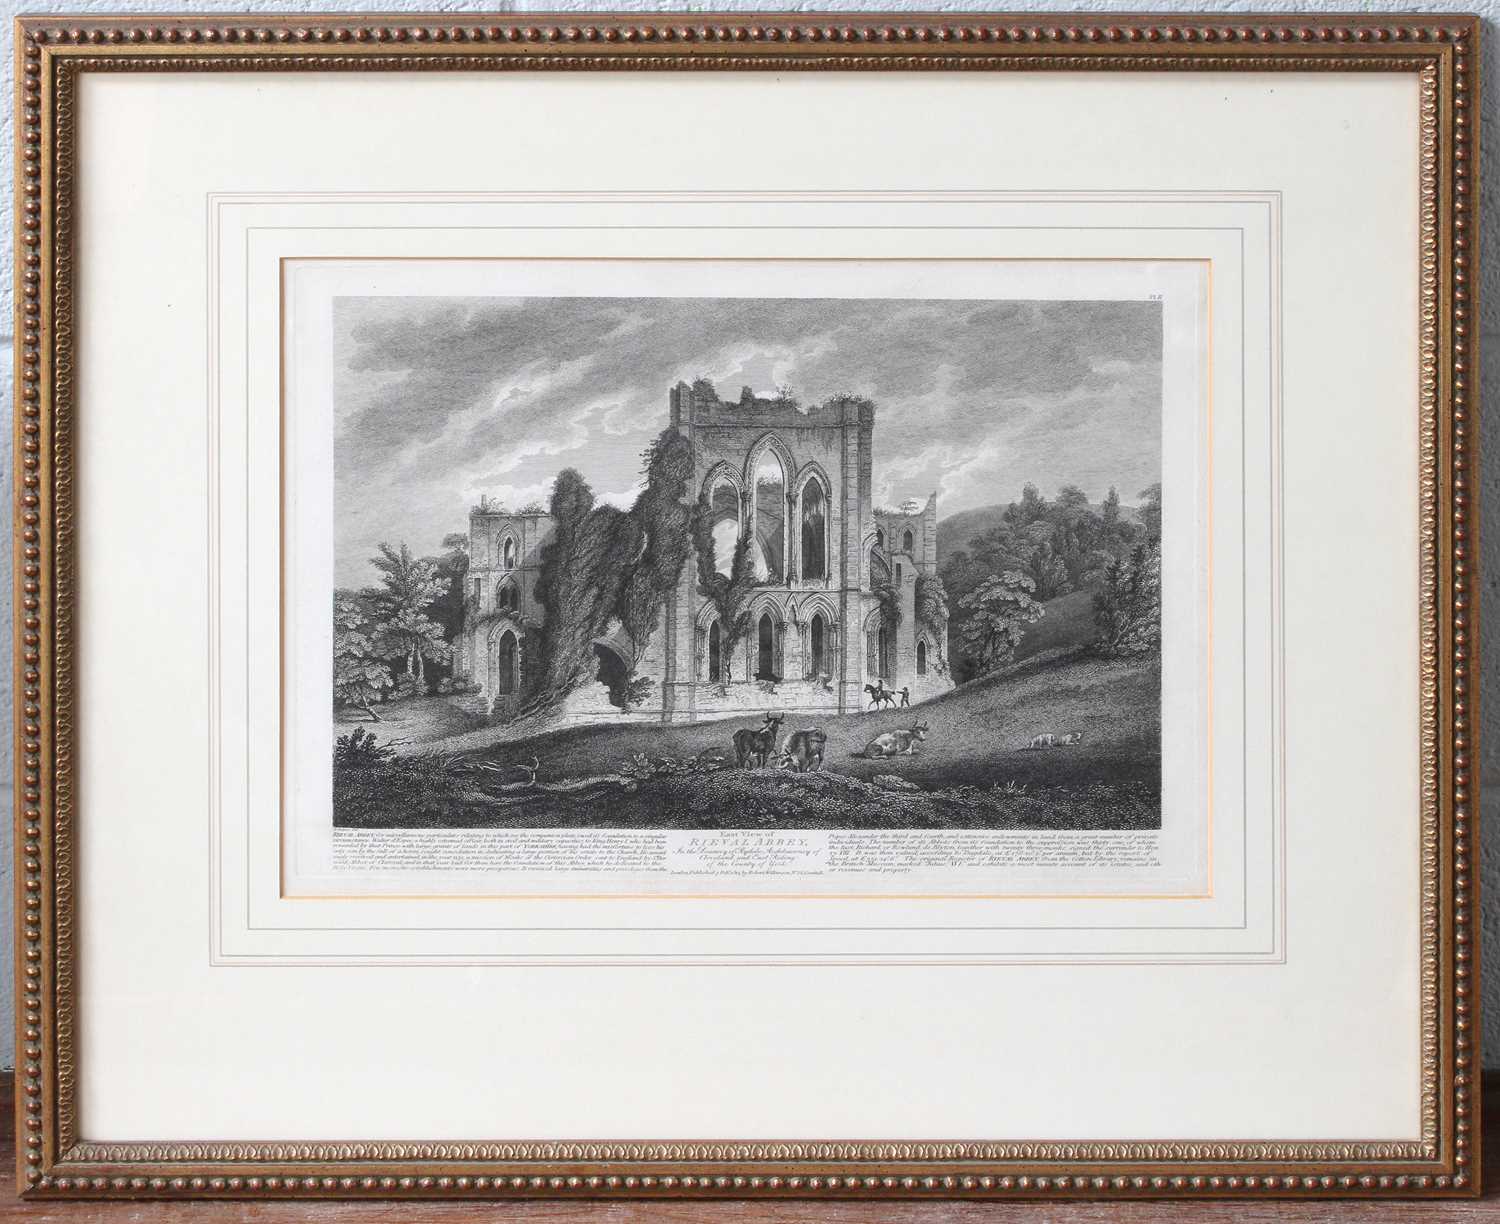 E.Dayes (Late 18th/Early 19th Century) "East View of Rieval Abbey" "South West View of Rieval Abbey" - Image 3 of 3